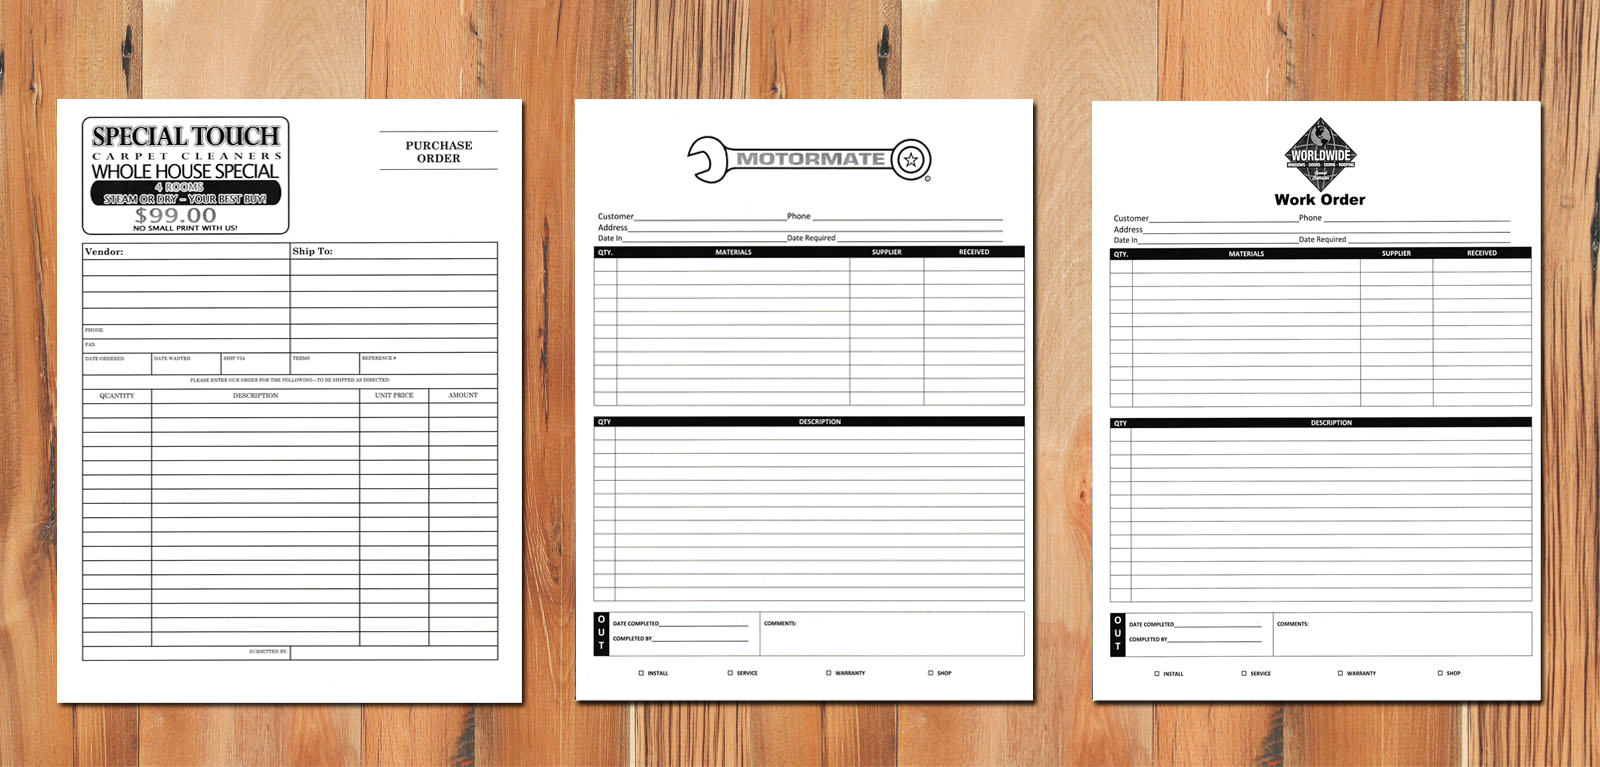 Invoices 500 Custom Business Forms 3 Part Carbonless 8.5 x 11 Work Orders 